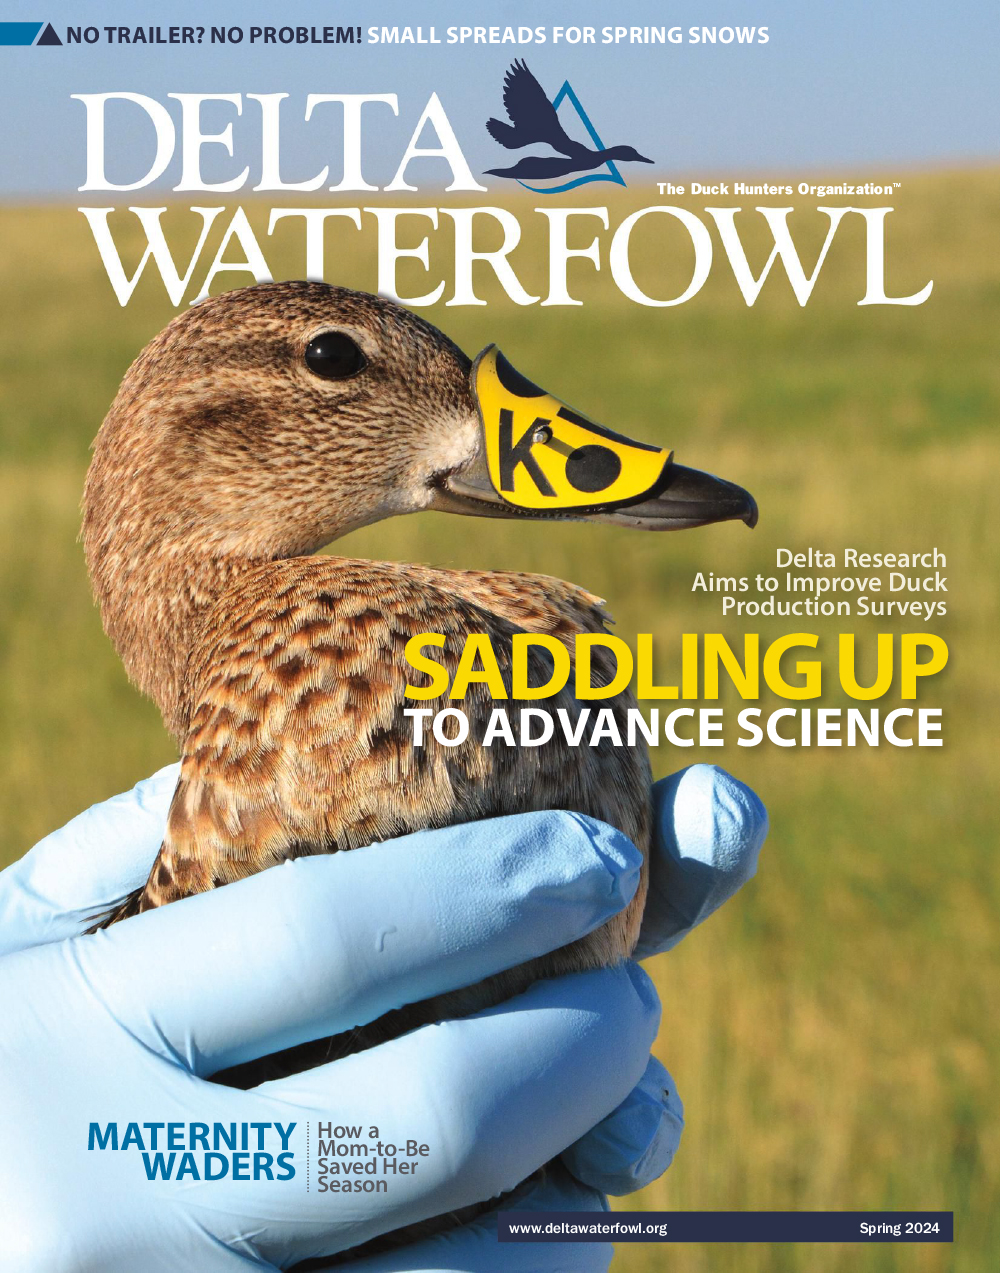 The cover of the Spring 2024 issue of award-winning Delta Waterfowl magazine can be seen.